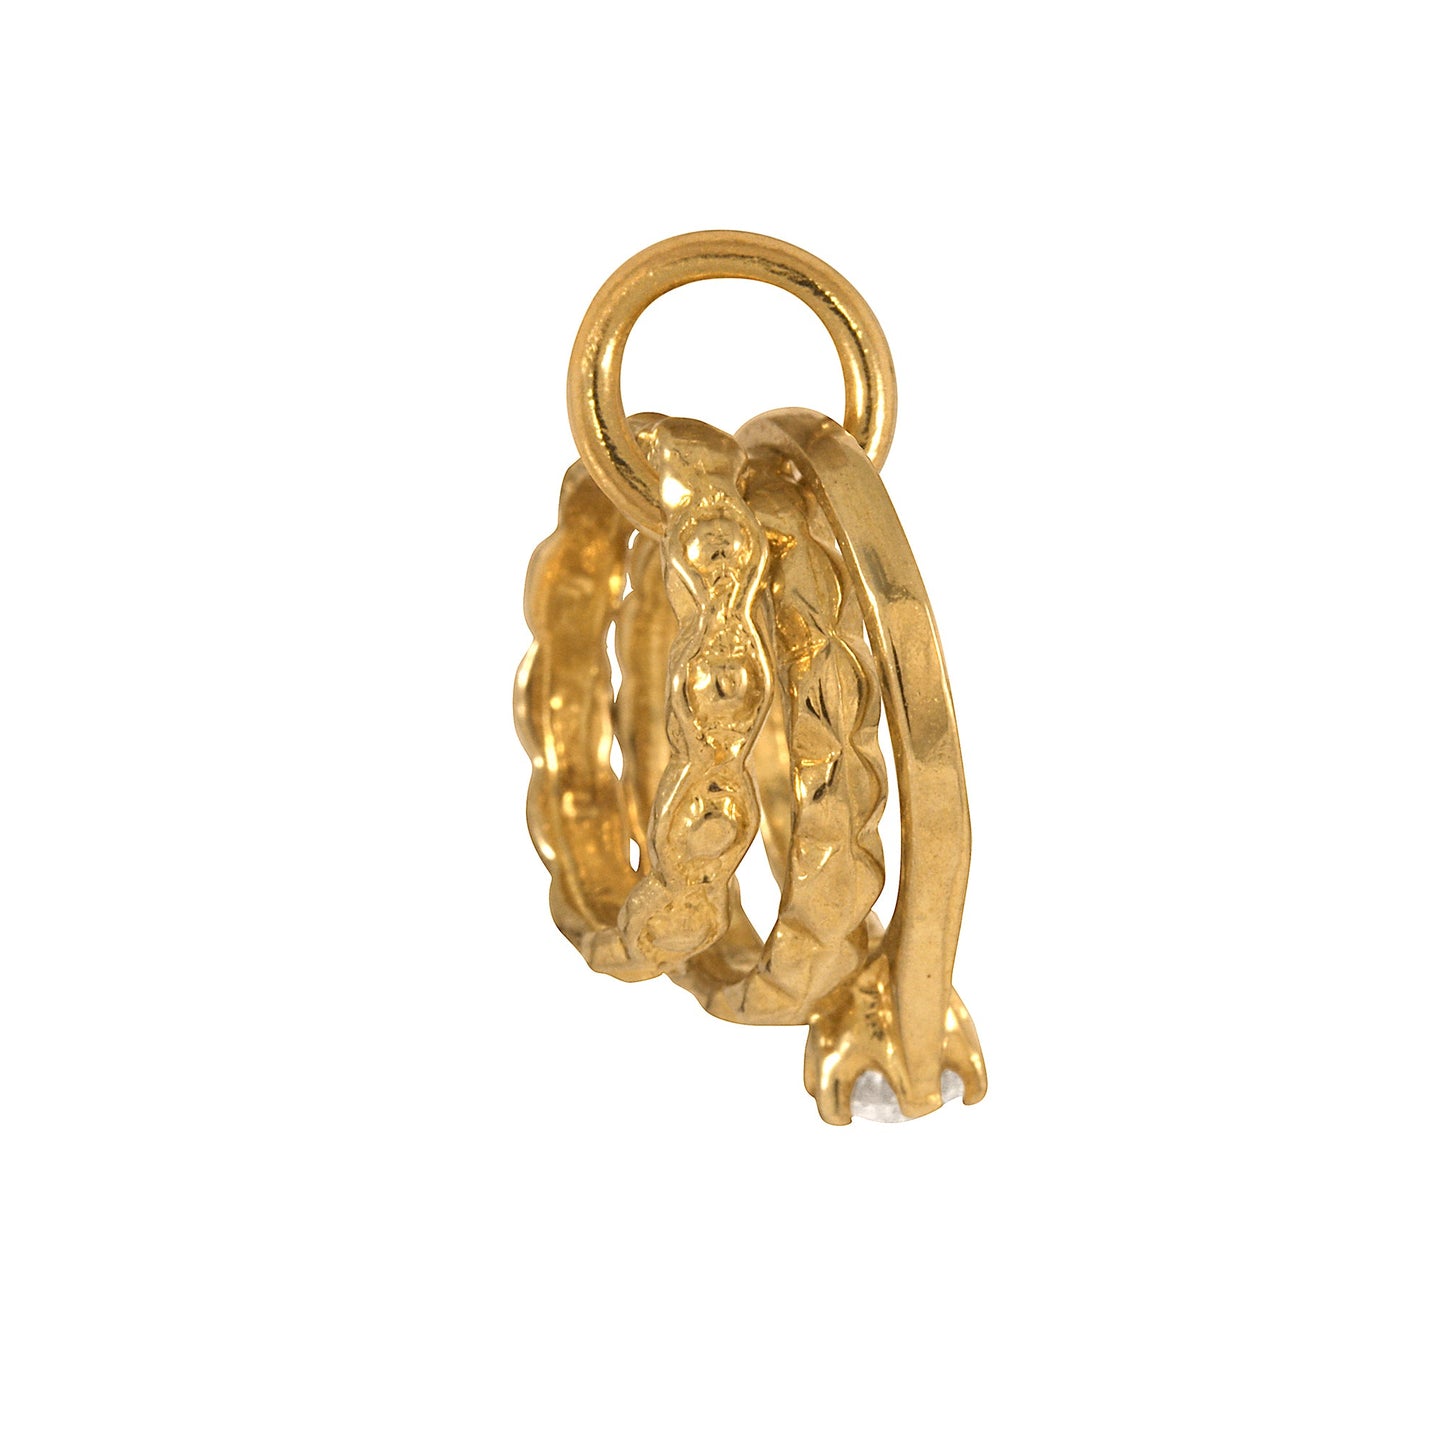 9ct Gold 3 Rings Crystal Charm